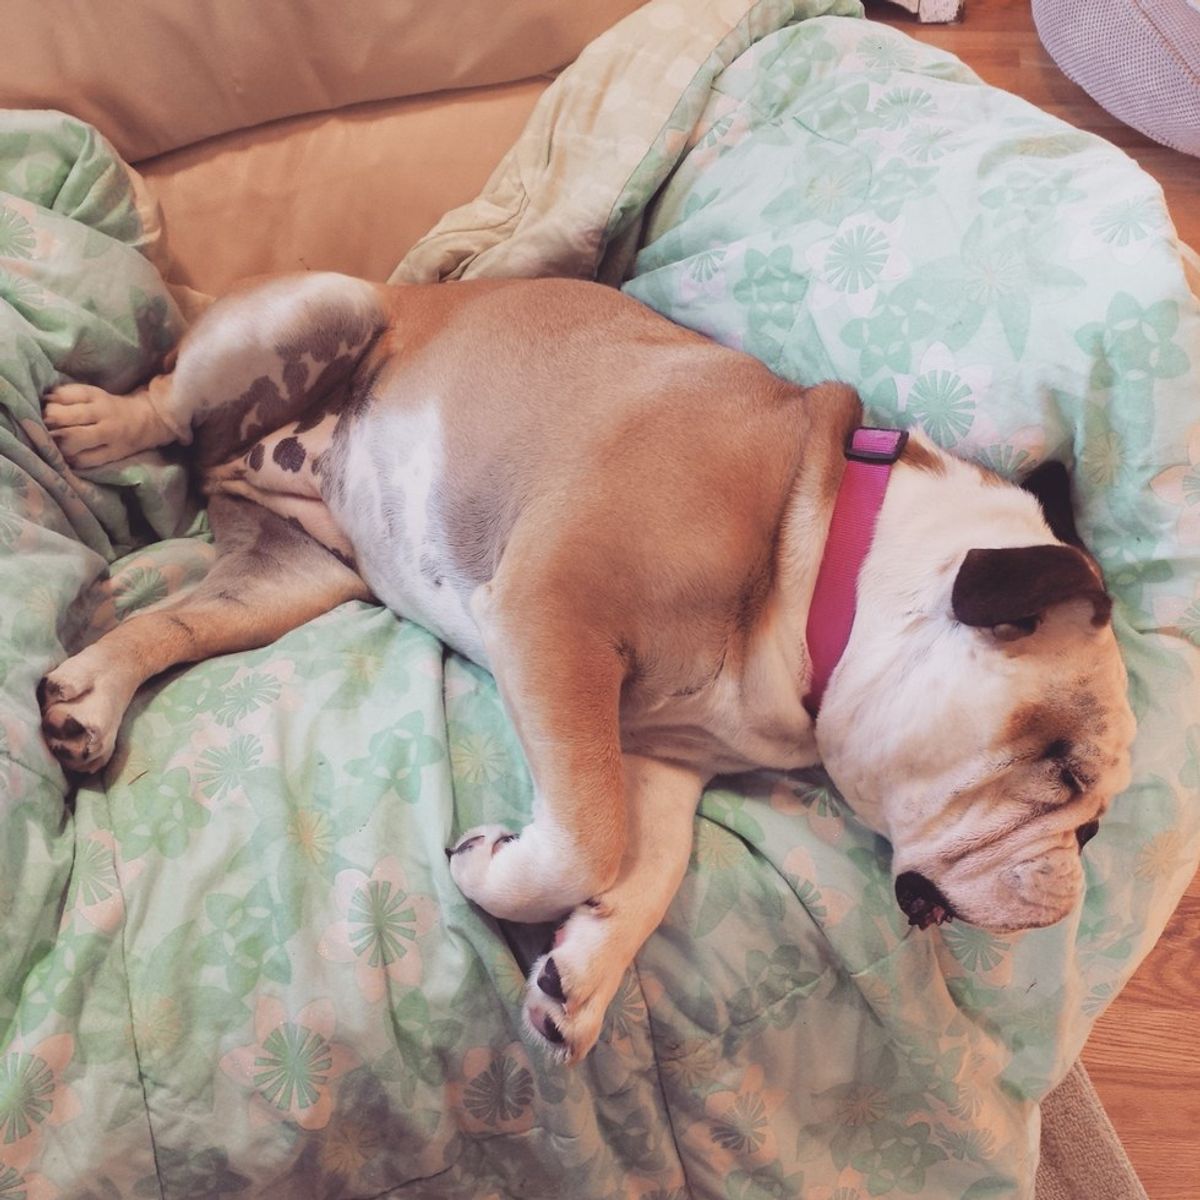 7 Things You Need To Know Before Getting An English Bulldog